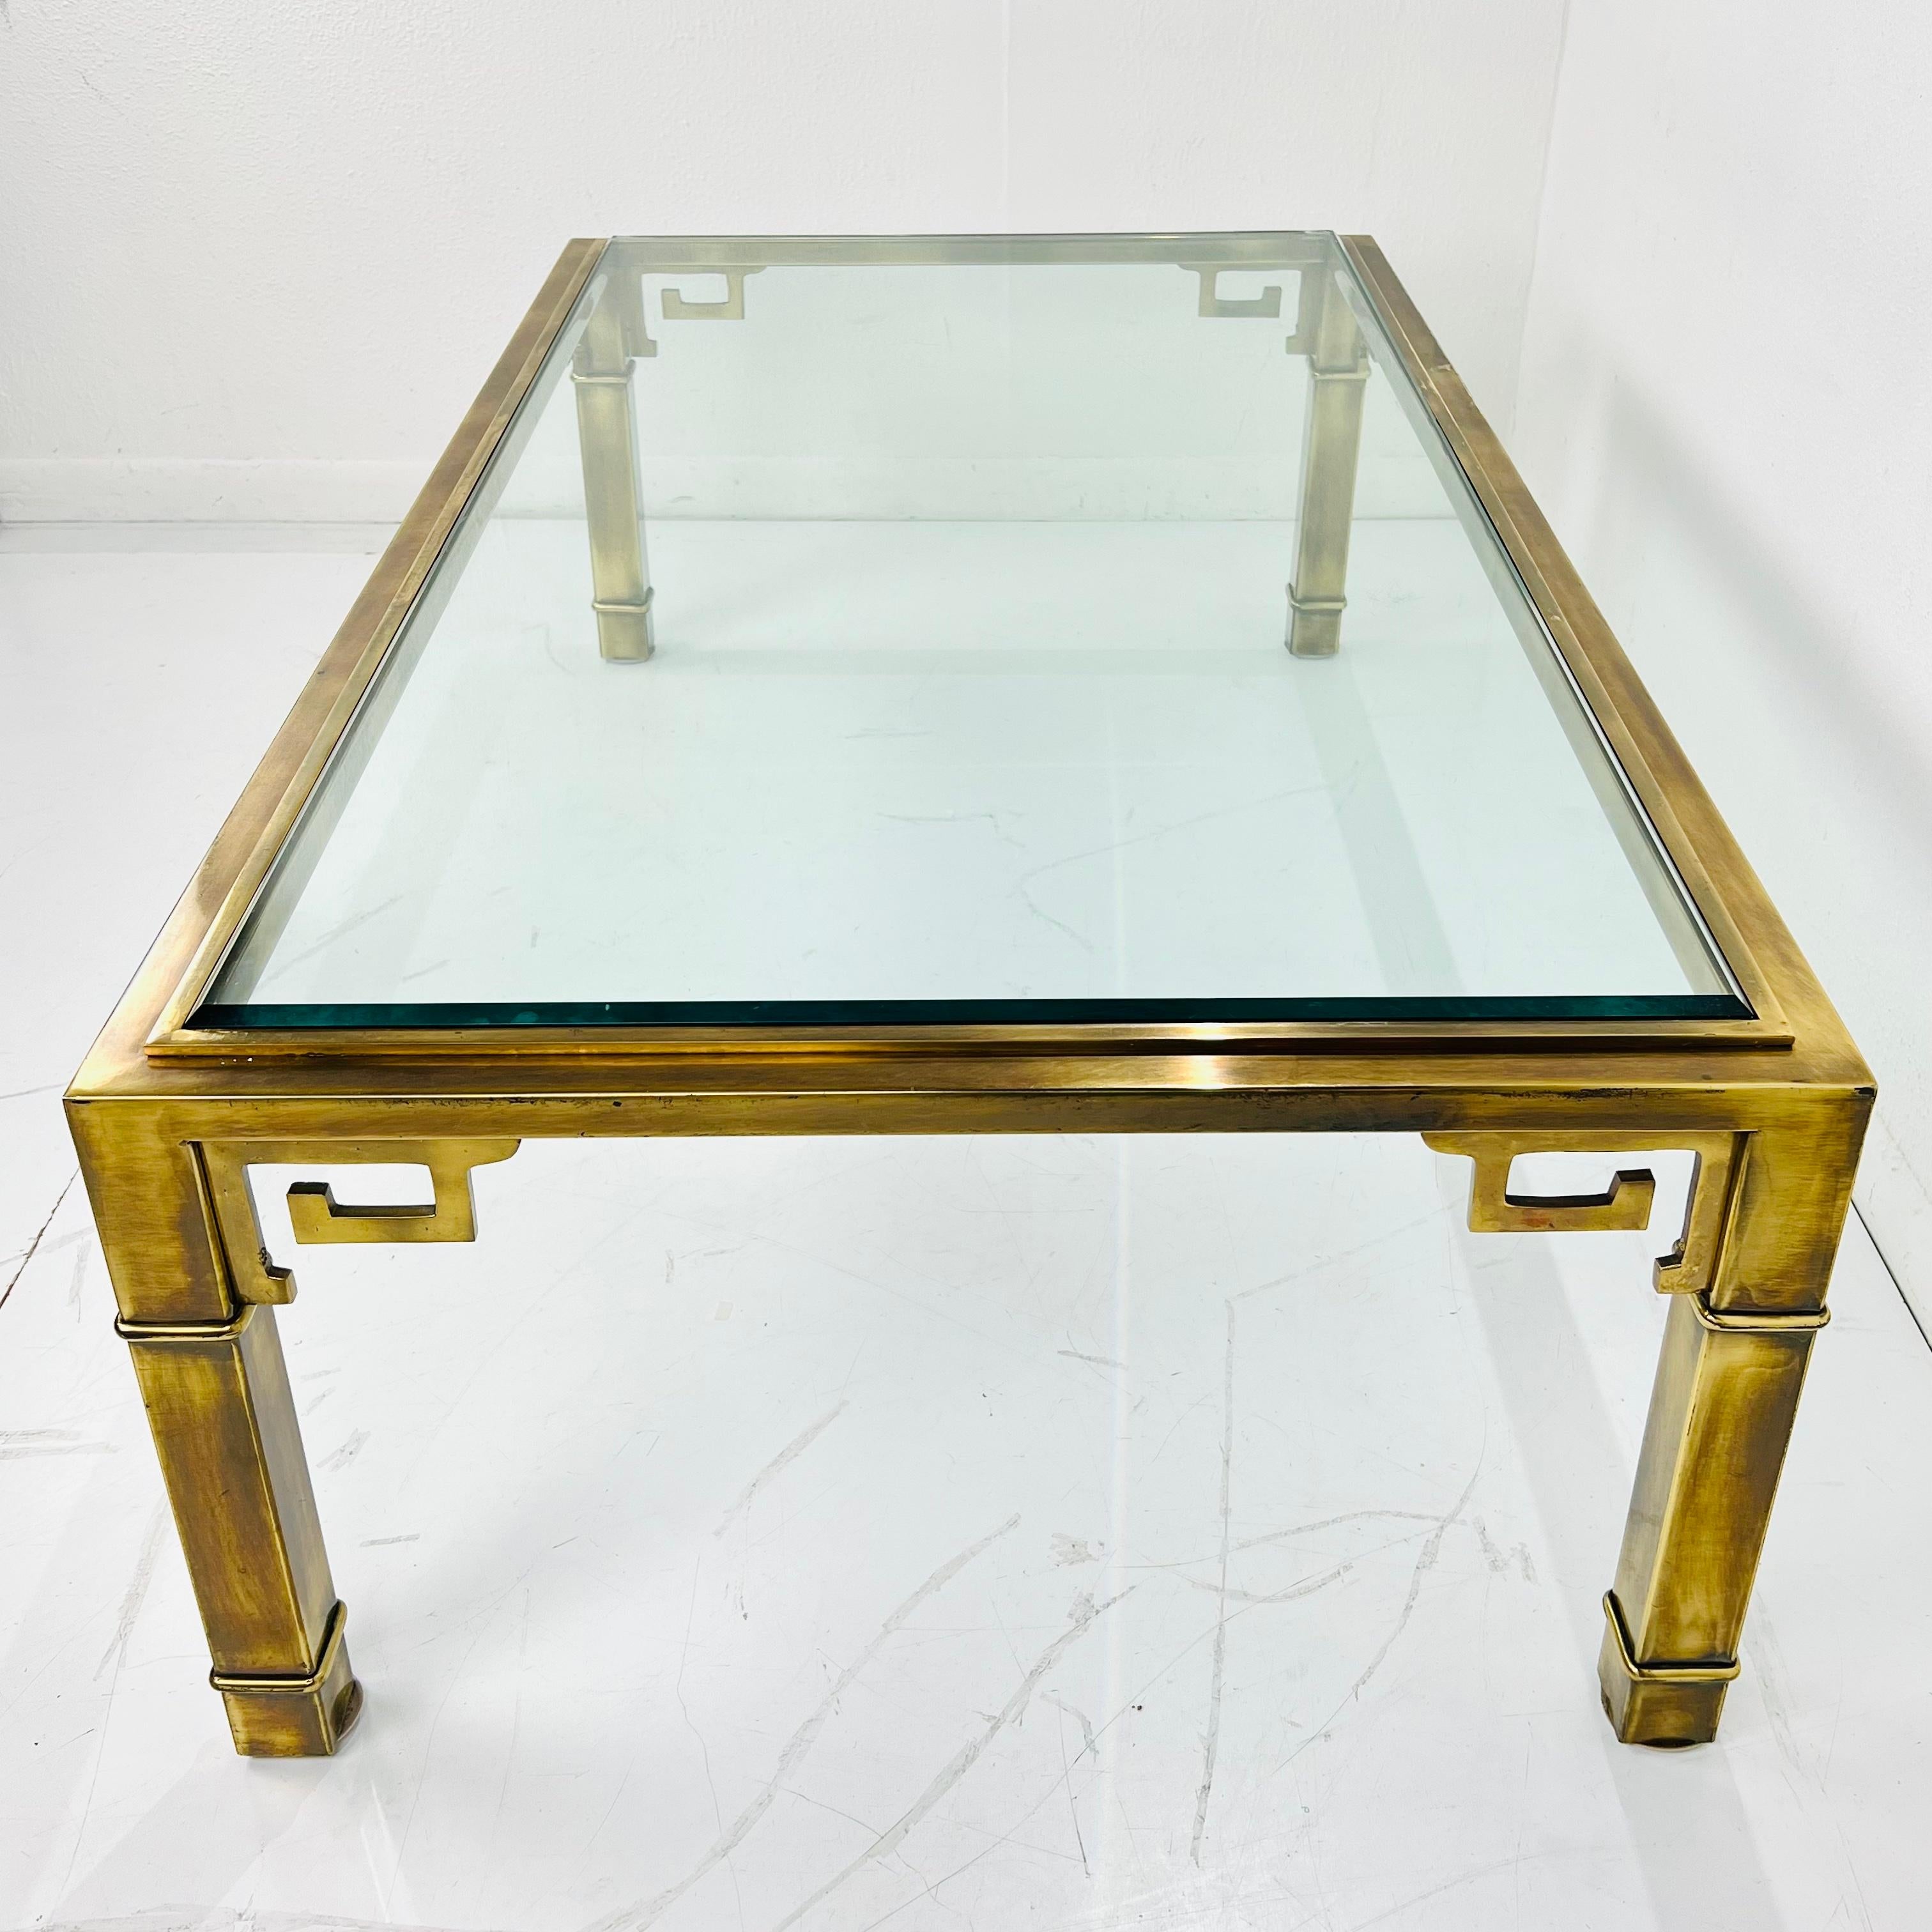 Iconic long and low rectangular brass and glass Greek key coffee table, made in Italy for Mastercraft Grand Rapids, MI, circa mid-twentieth century. Good condition with beautiful patina; glass has some chips at edge (pictured) - Glass top will be